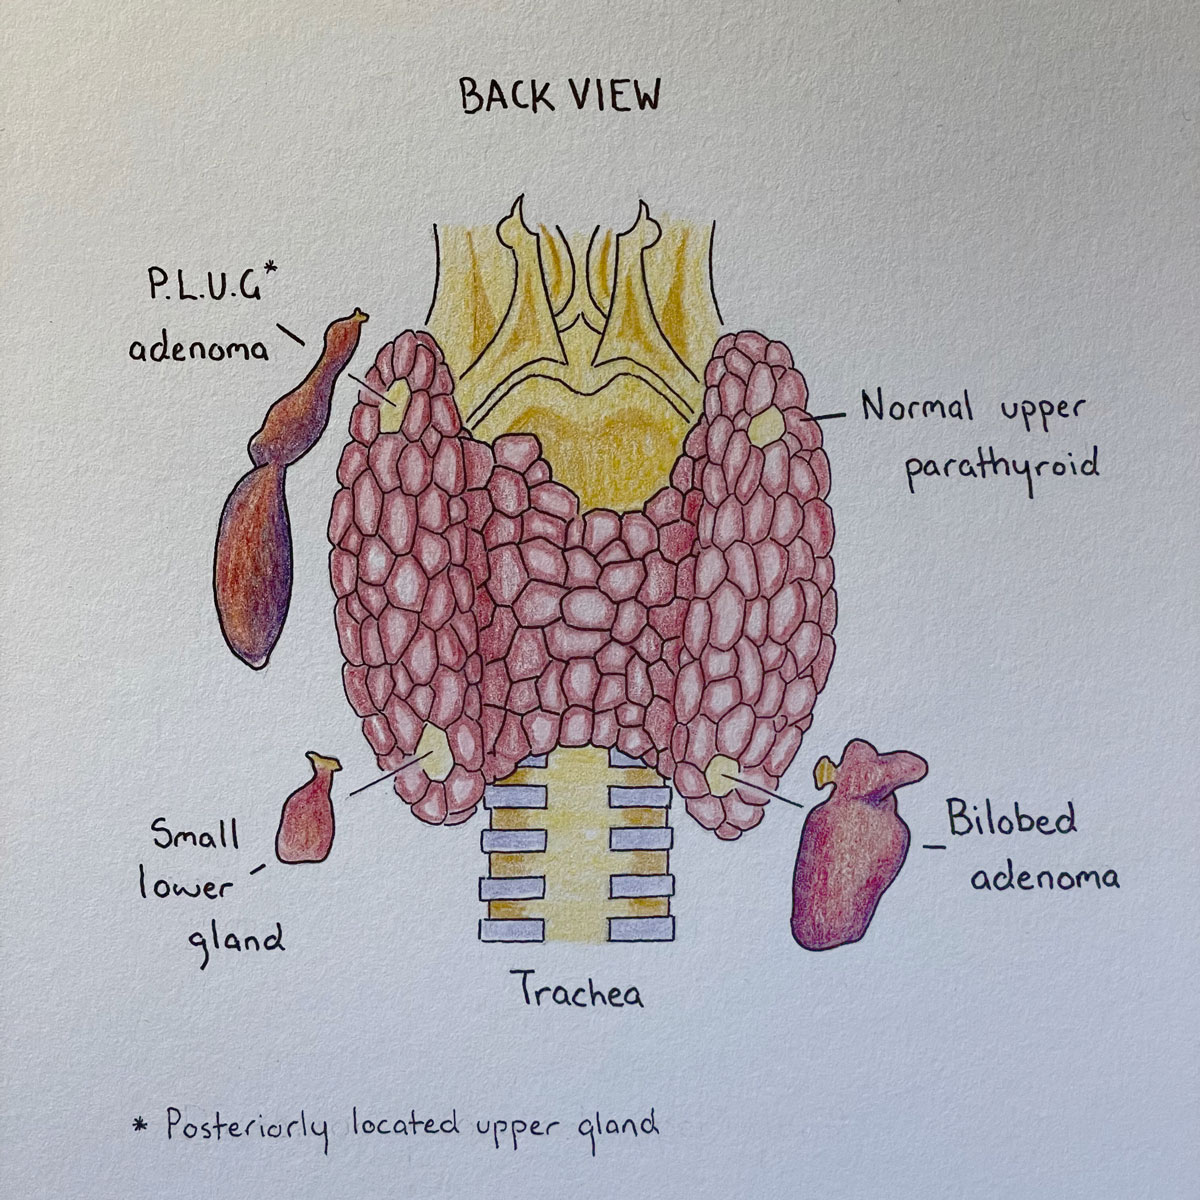 Colour anatomical illustration back view of thyroid adenoma